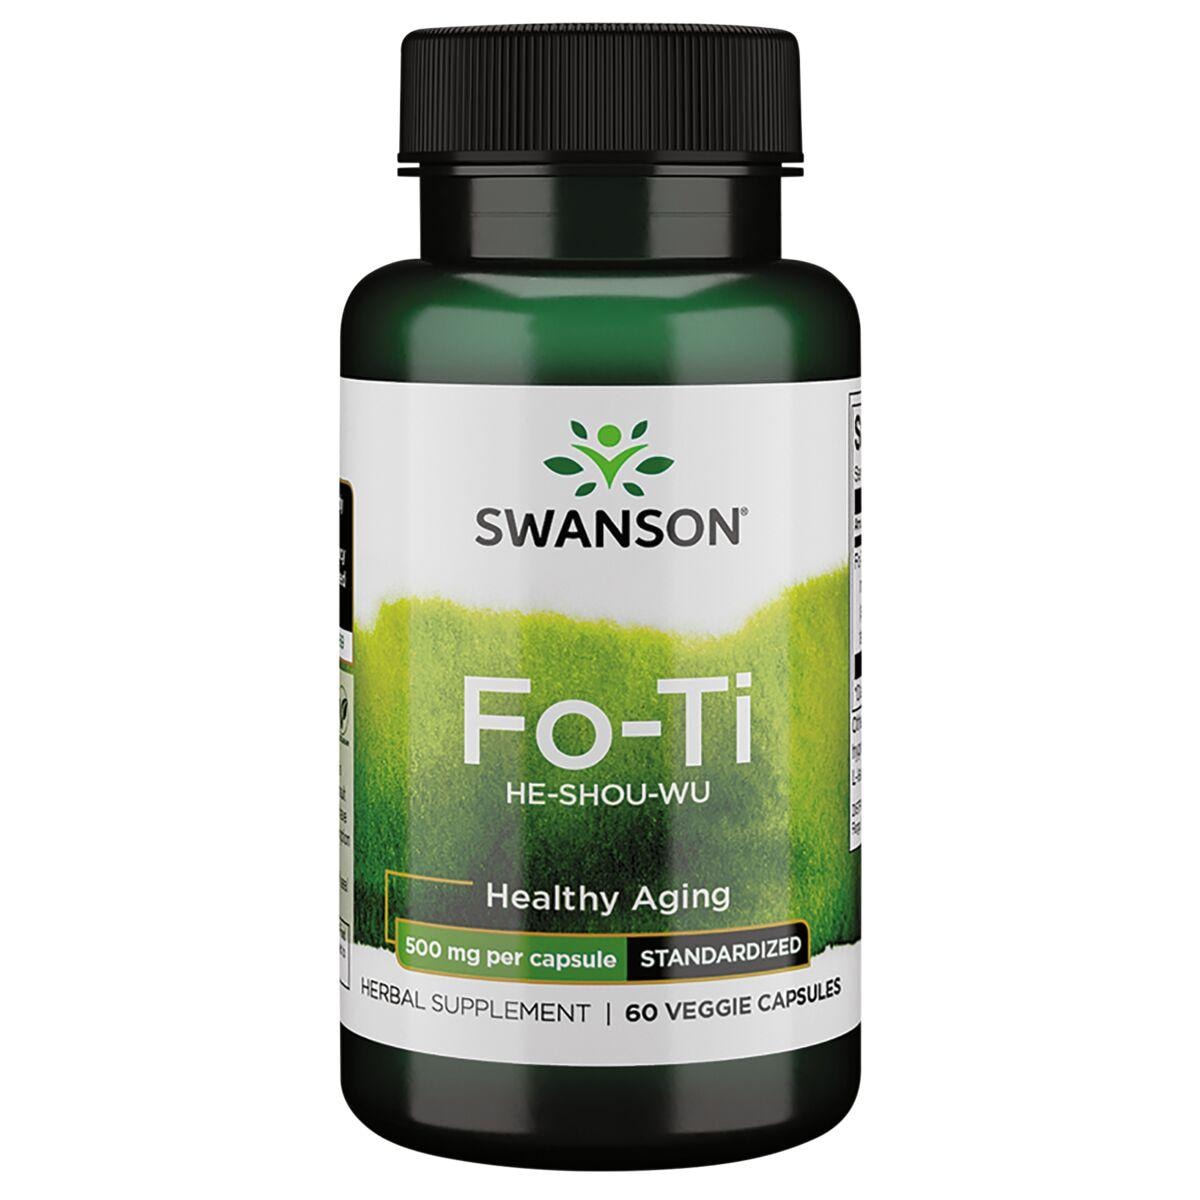 Swanson Superior Herbs Fo-Ti Extract He-Shou-Wu Vitamin 500 mg 60 Veg Caps Herbs and Supplements